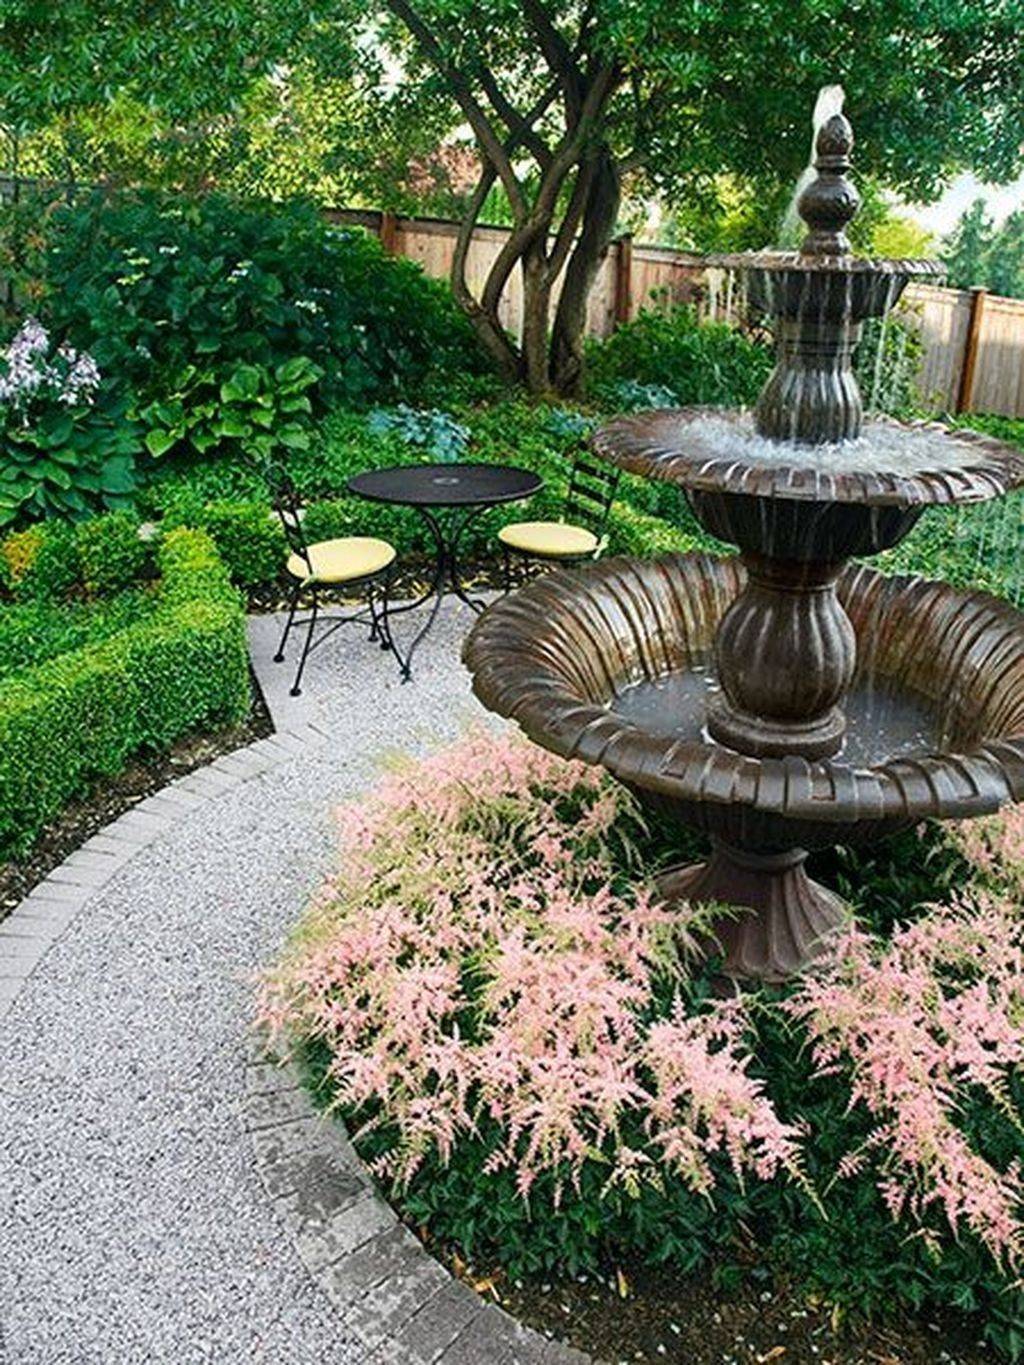 Awesome Backyard Pond And Water Feature Landscaping Design Ideas